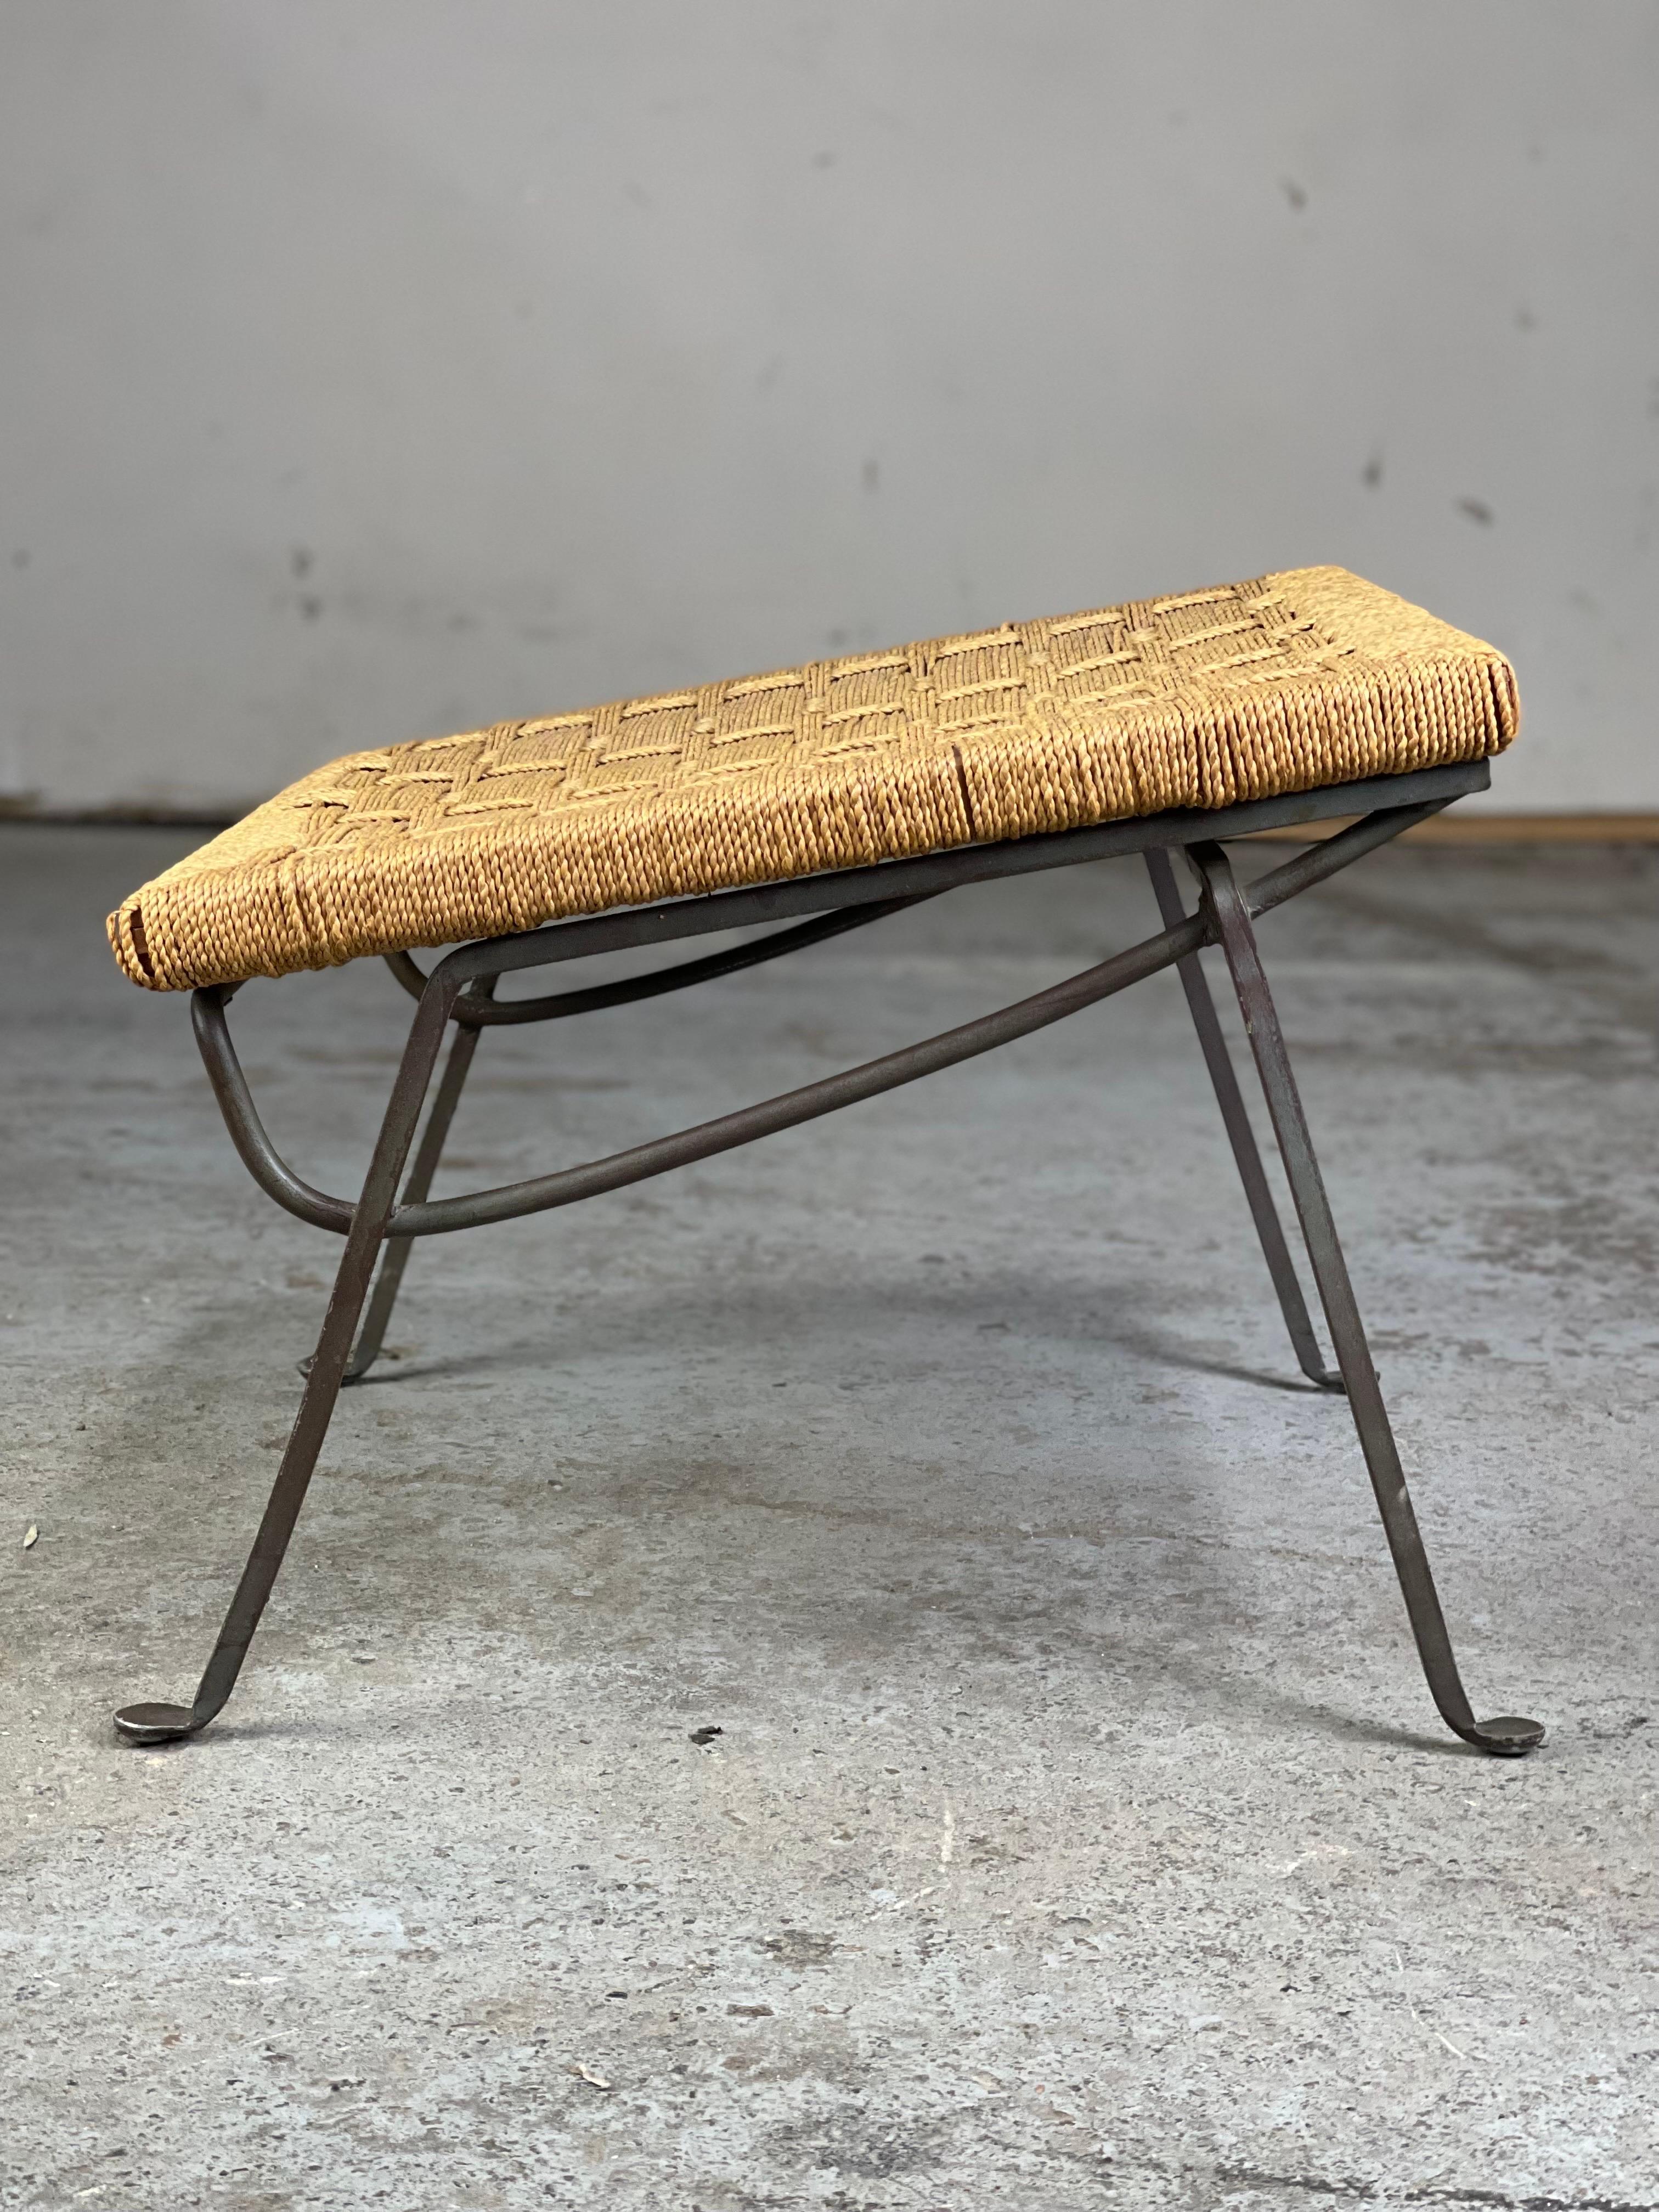 Super rare outdoor/indoor low stool by Maurizio Temperstini for John B. Salterini. Incredible piece of hard-to-find early Modern Design - and it has the ITALY stamp and paper tag underneath. That is unbelievable. I have only seen this stool in a